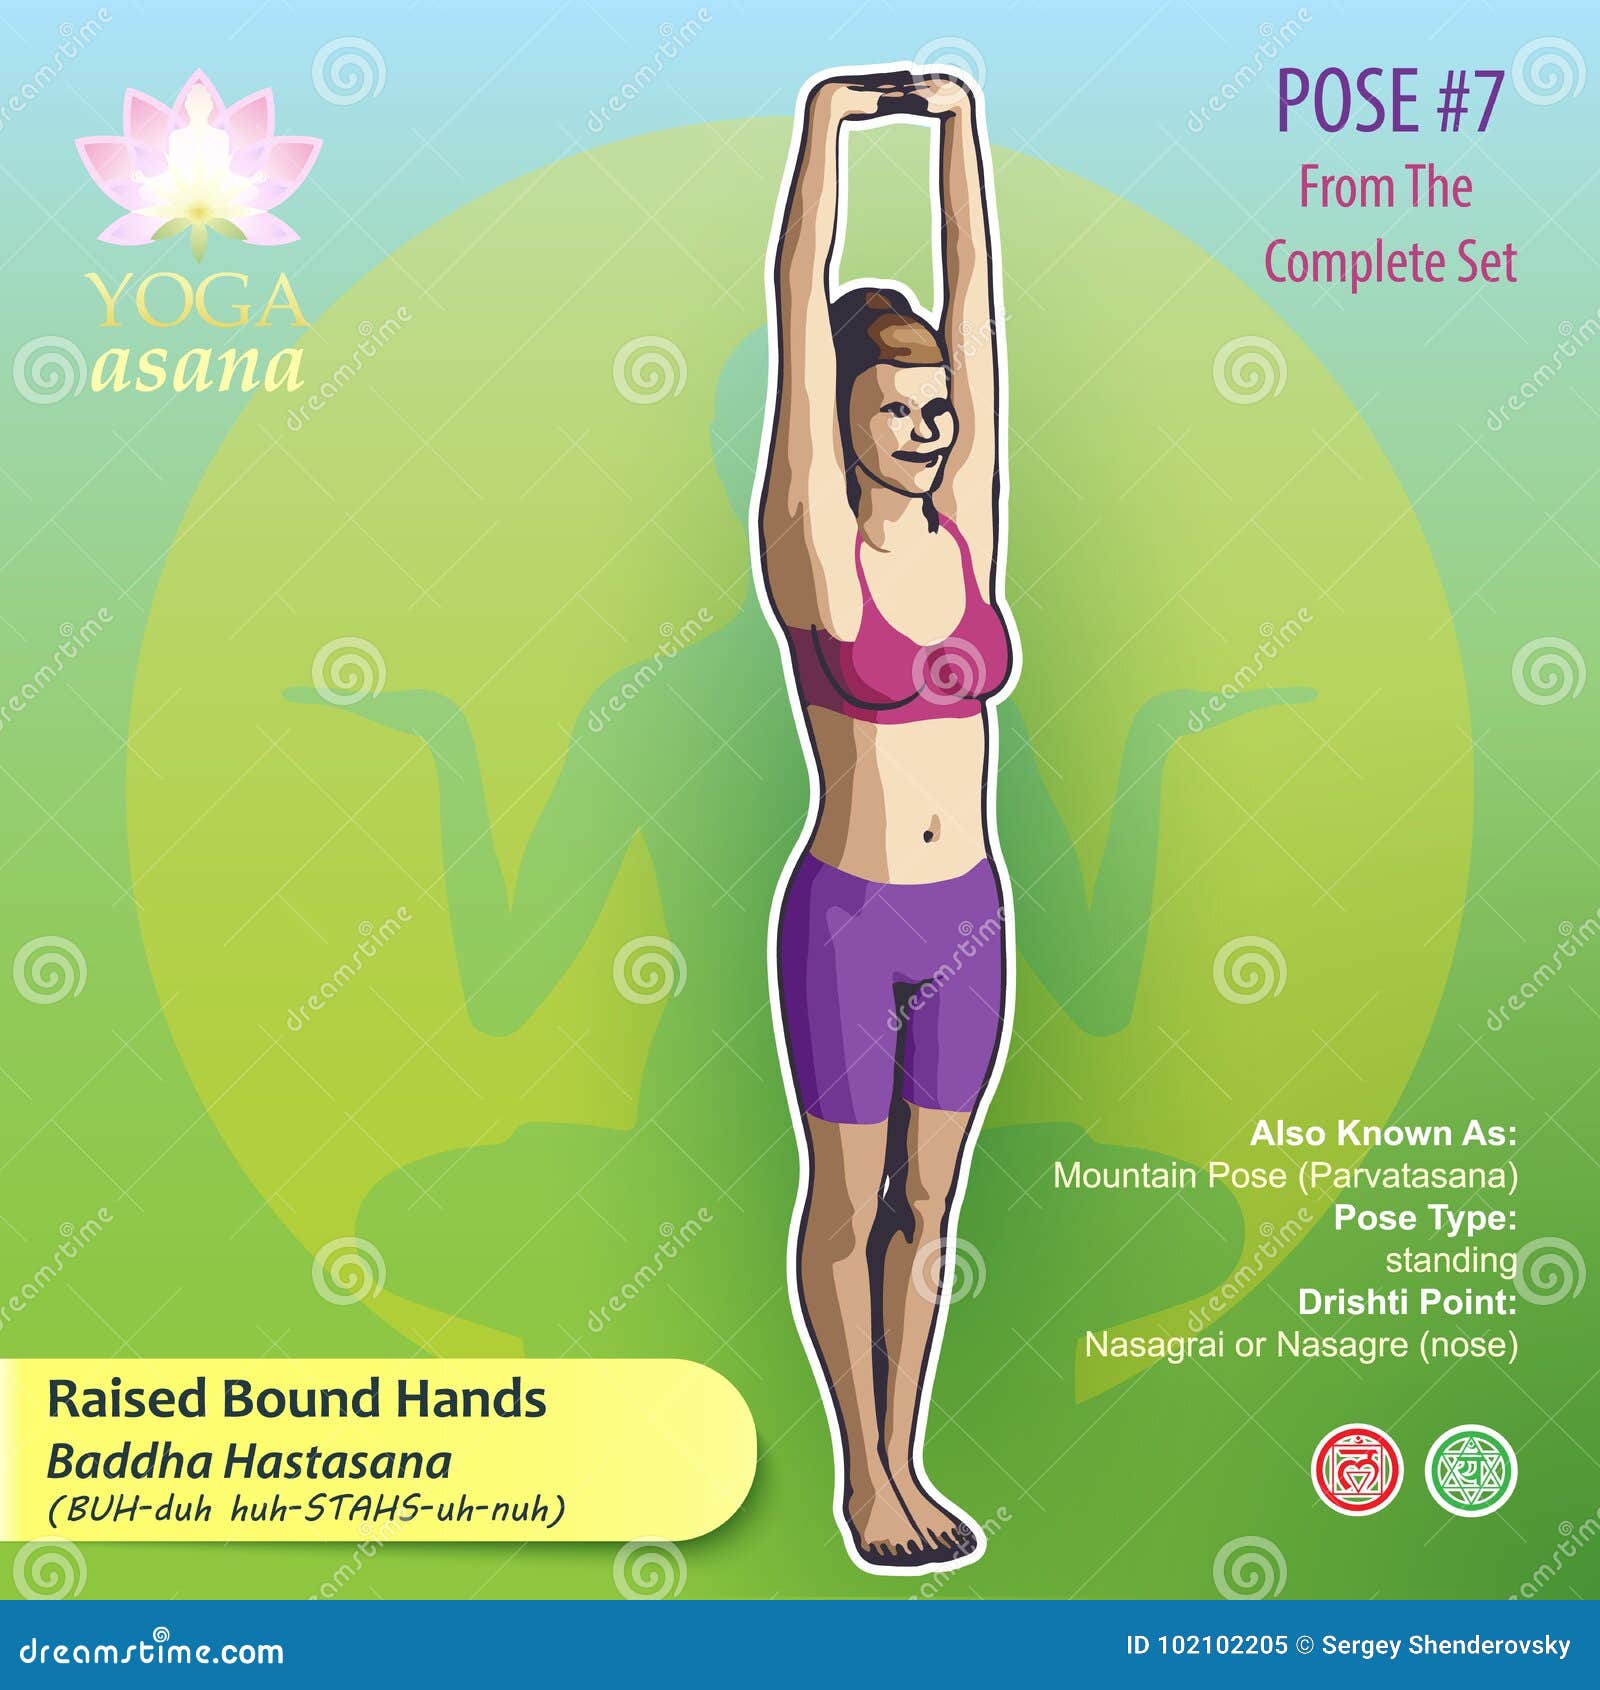 Buy 4 Pack - Yoga Block Poses + Pilates Exercise + Yoga Poses Positions +  Stretching Posters - Set of Four Fitness Charts (18 x 24, LAMINATED) Online  at Low Prices in India - Amazon.in